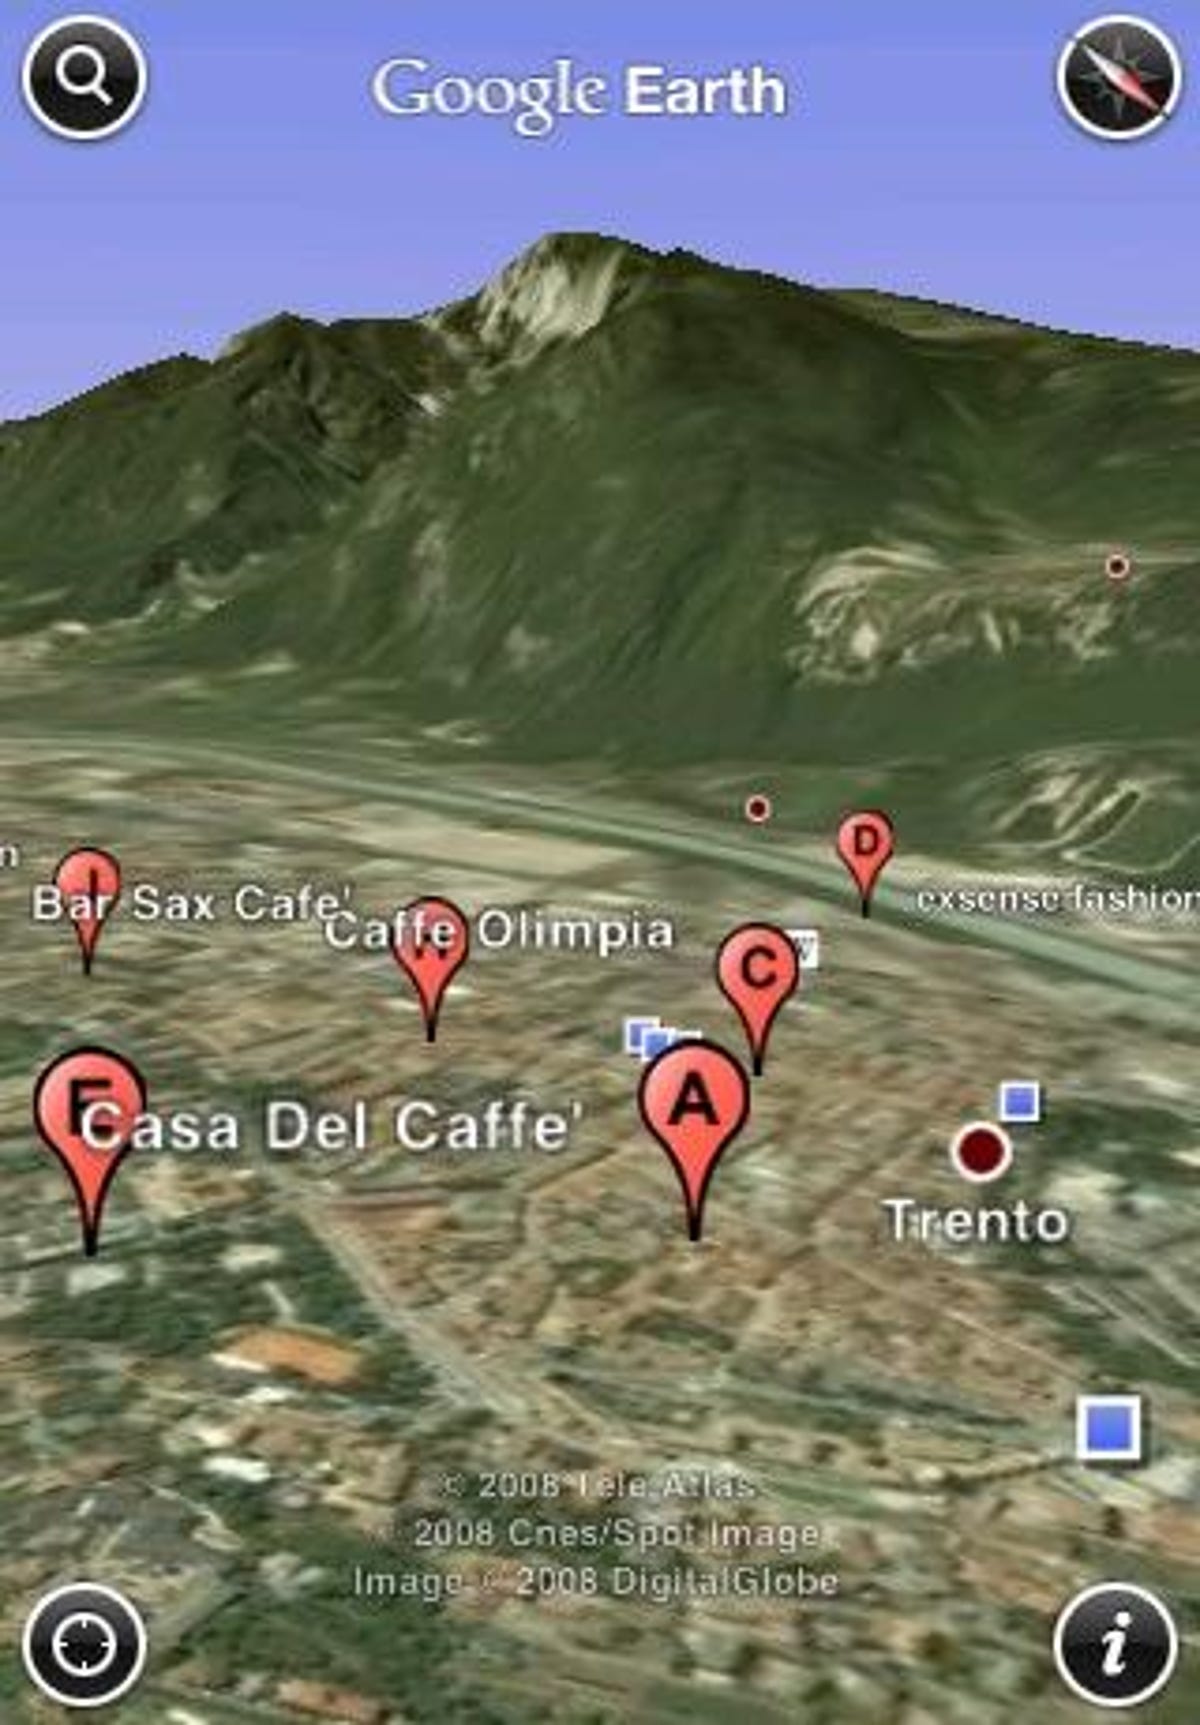 Search results show as pushpins on the Google Earth view.